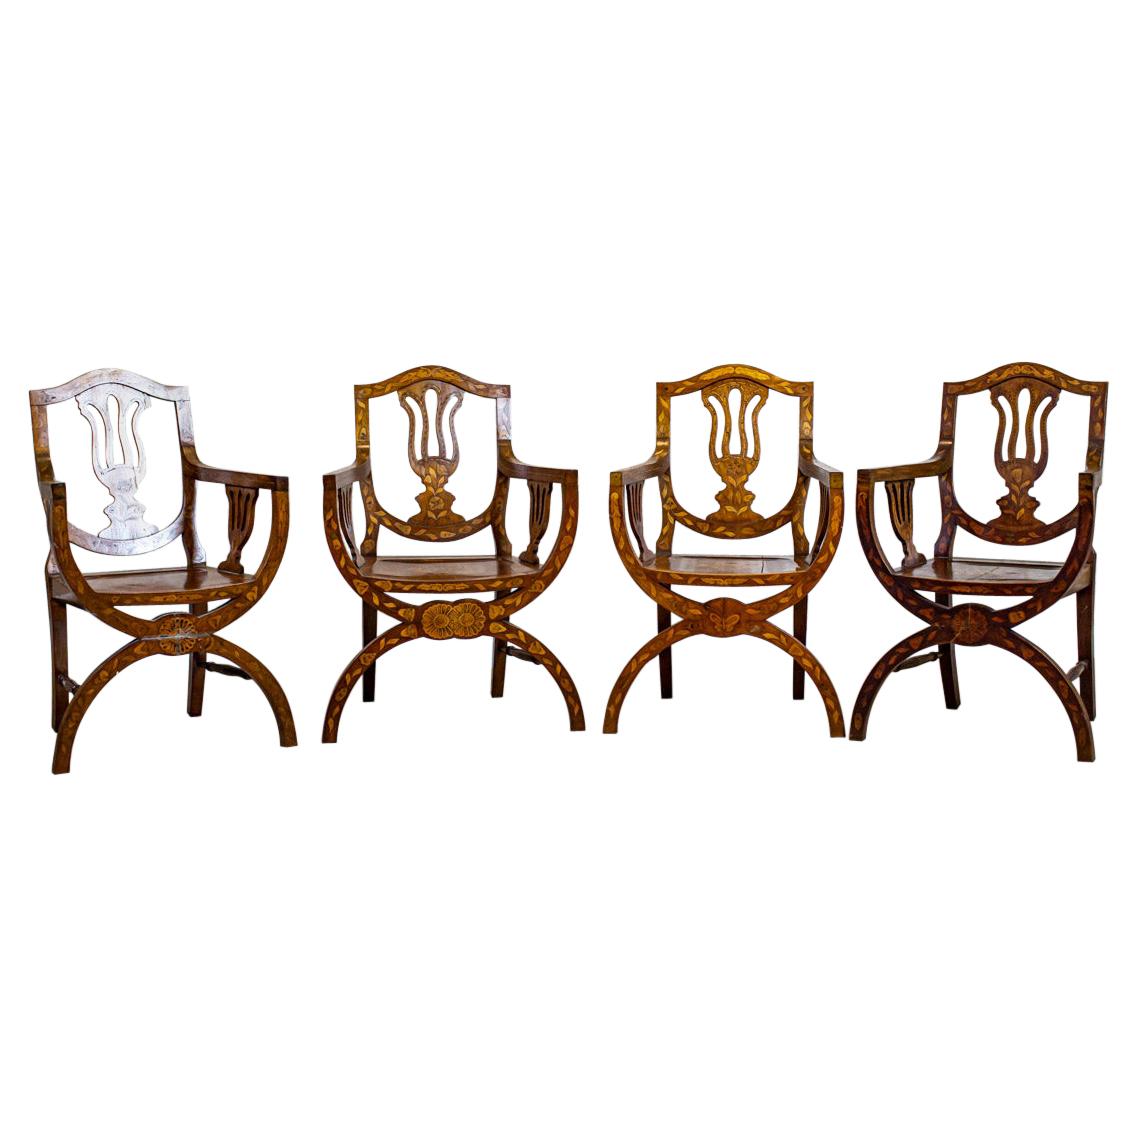 Set of 19th Century Inlaid Walnut Armchairs on X-Shaped Legs For Sale